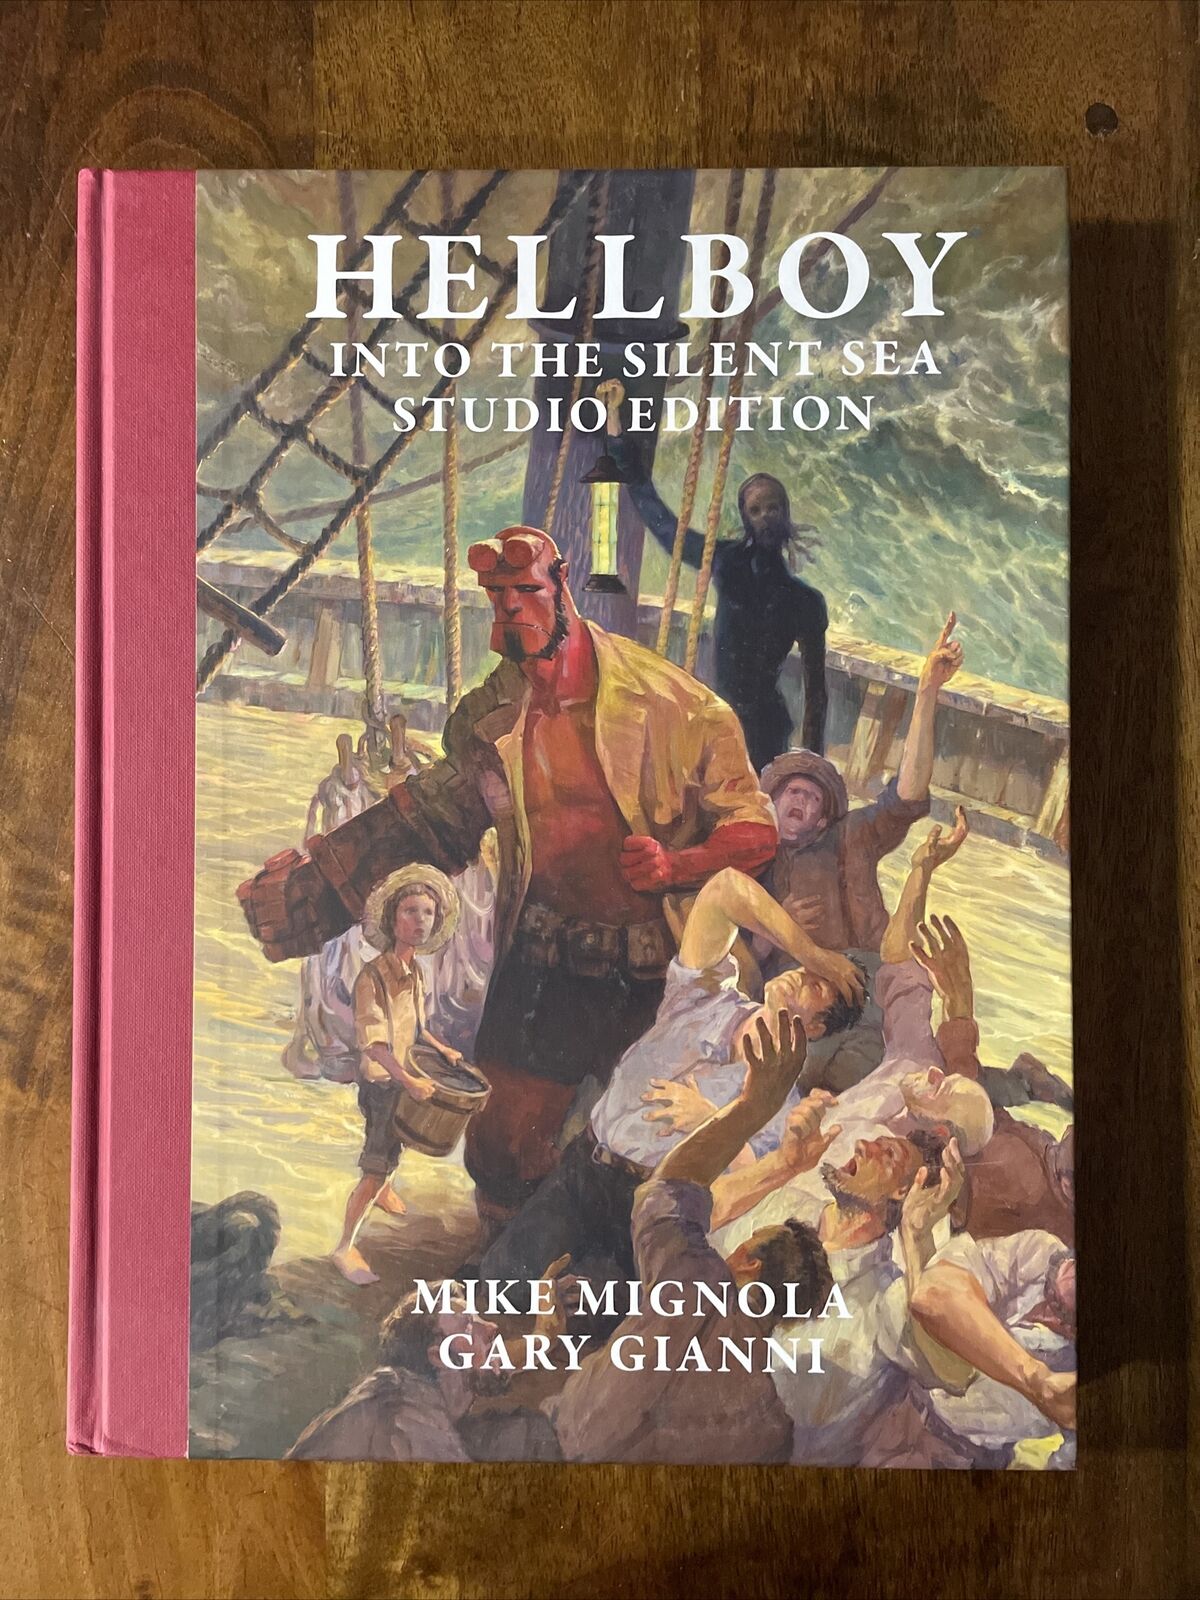 HELLBOY Into The Silent Sea Studio Edition By Mike Mignola and Gary Giani